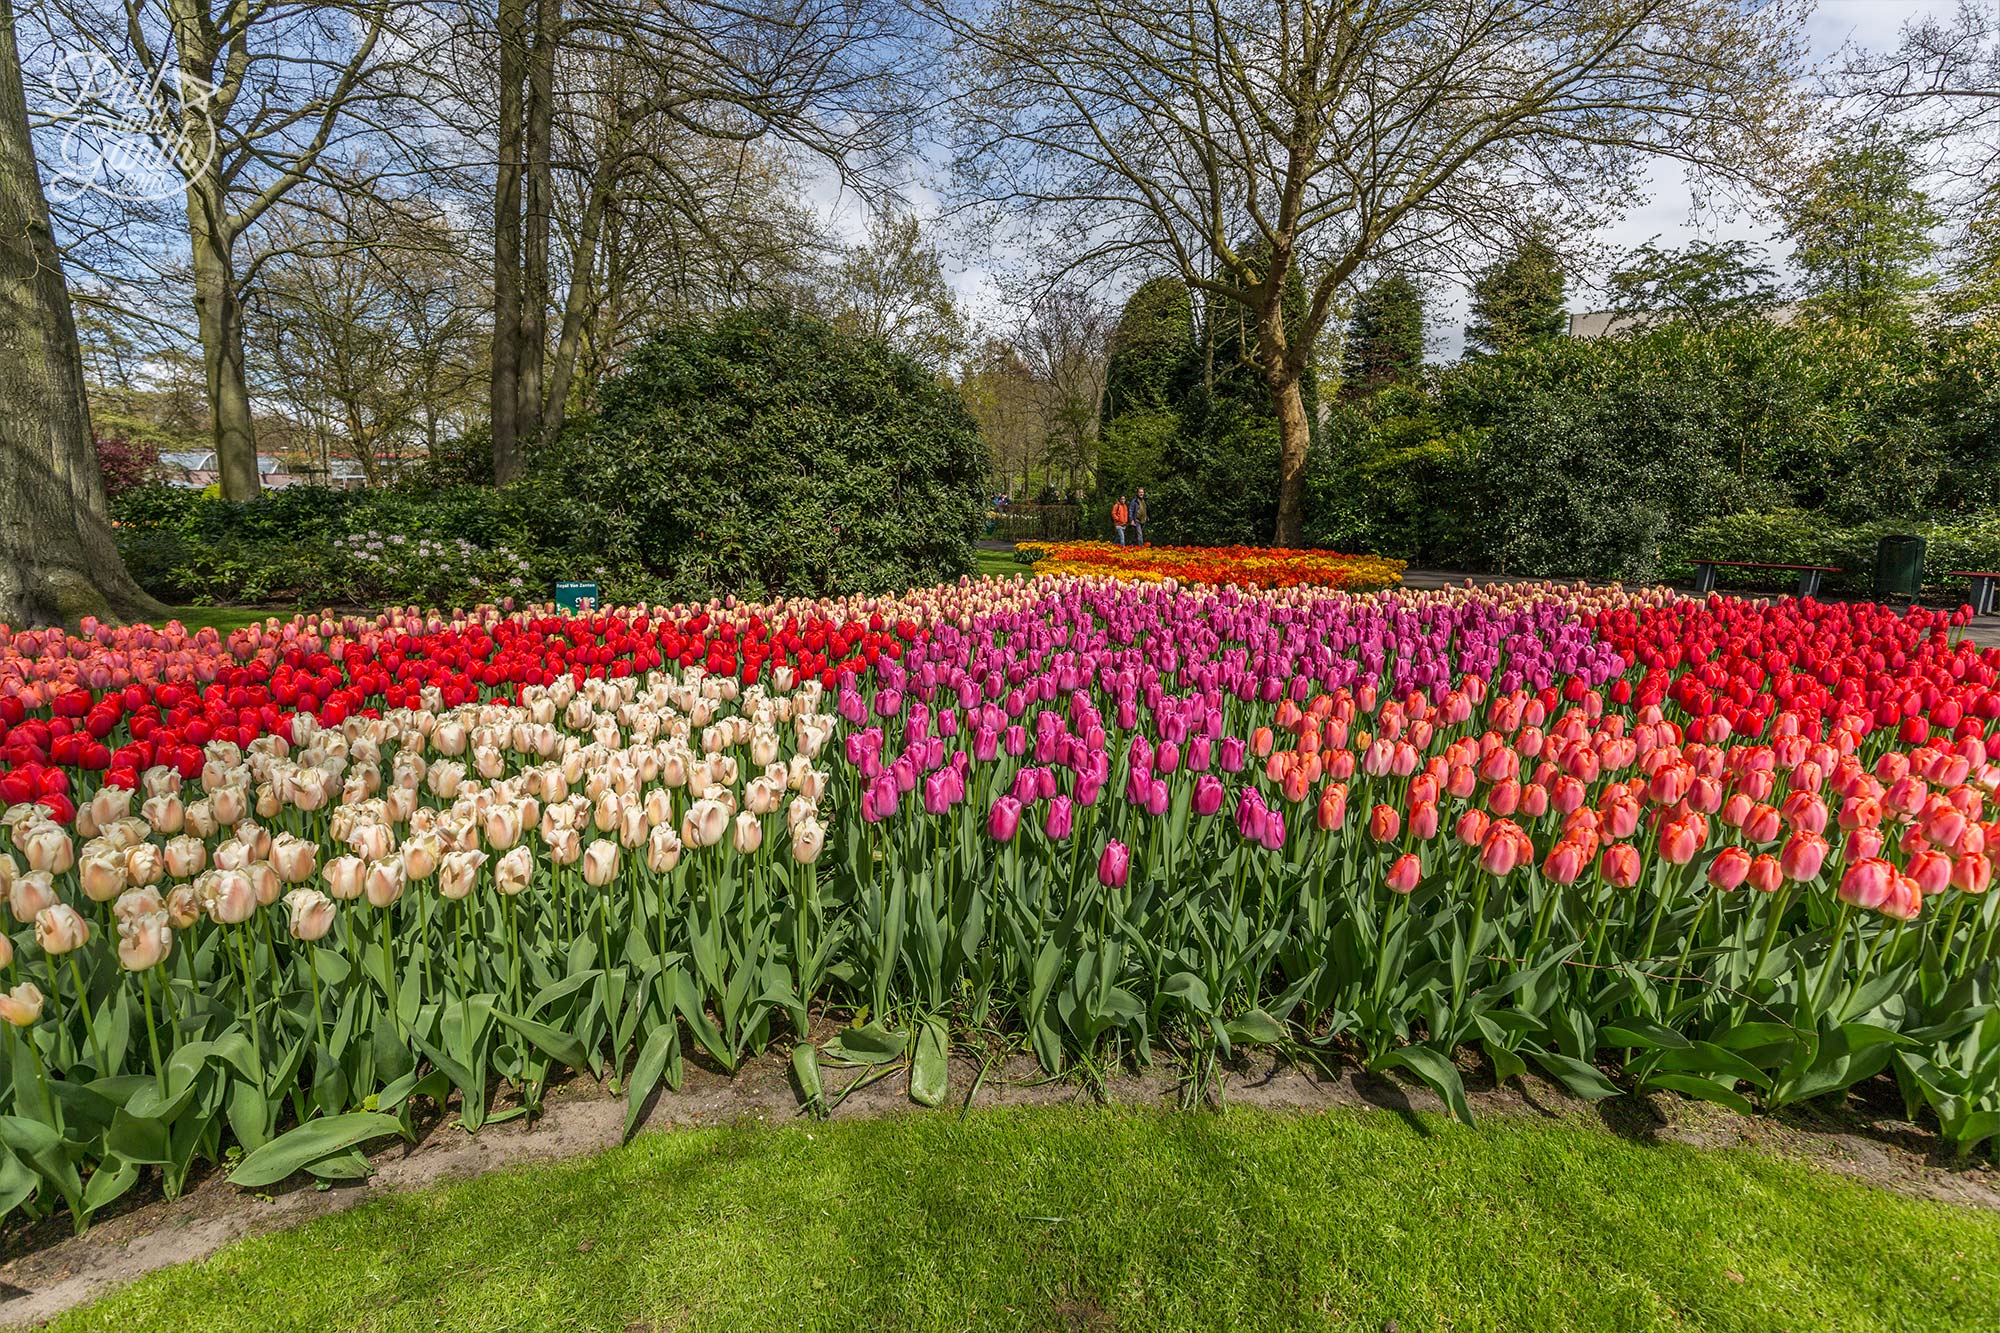 Look at this gorgeous carpet of tulips